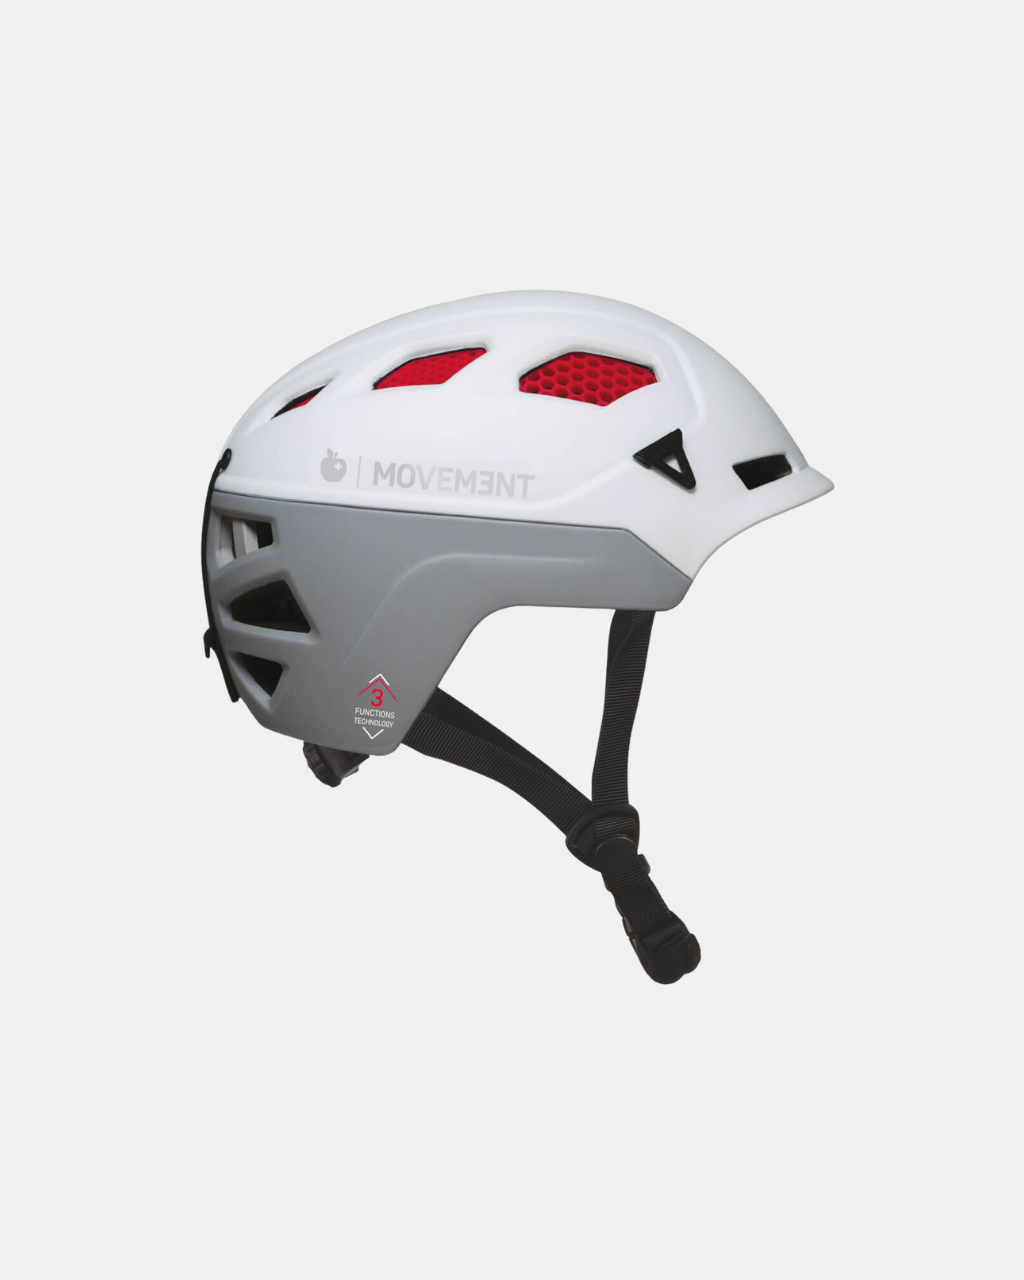 Experience the pinnacle of protection and style with the Movement 3Tech Alpi helmet.